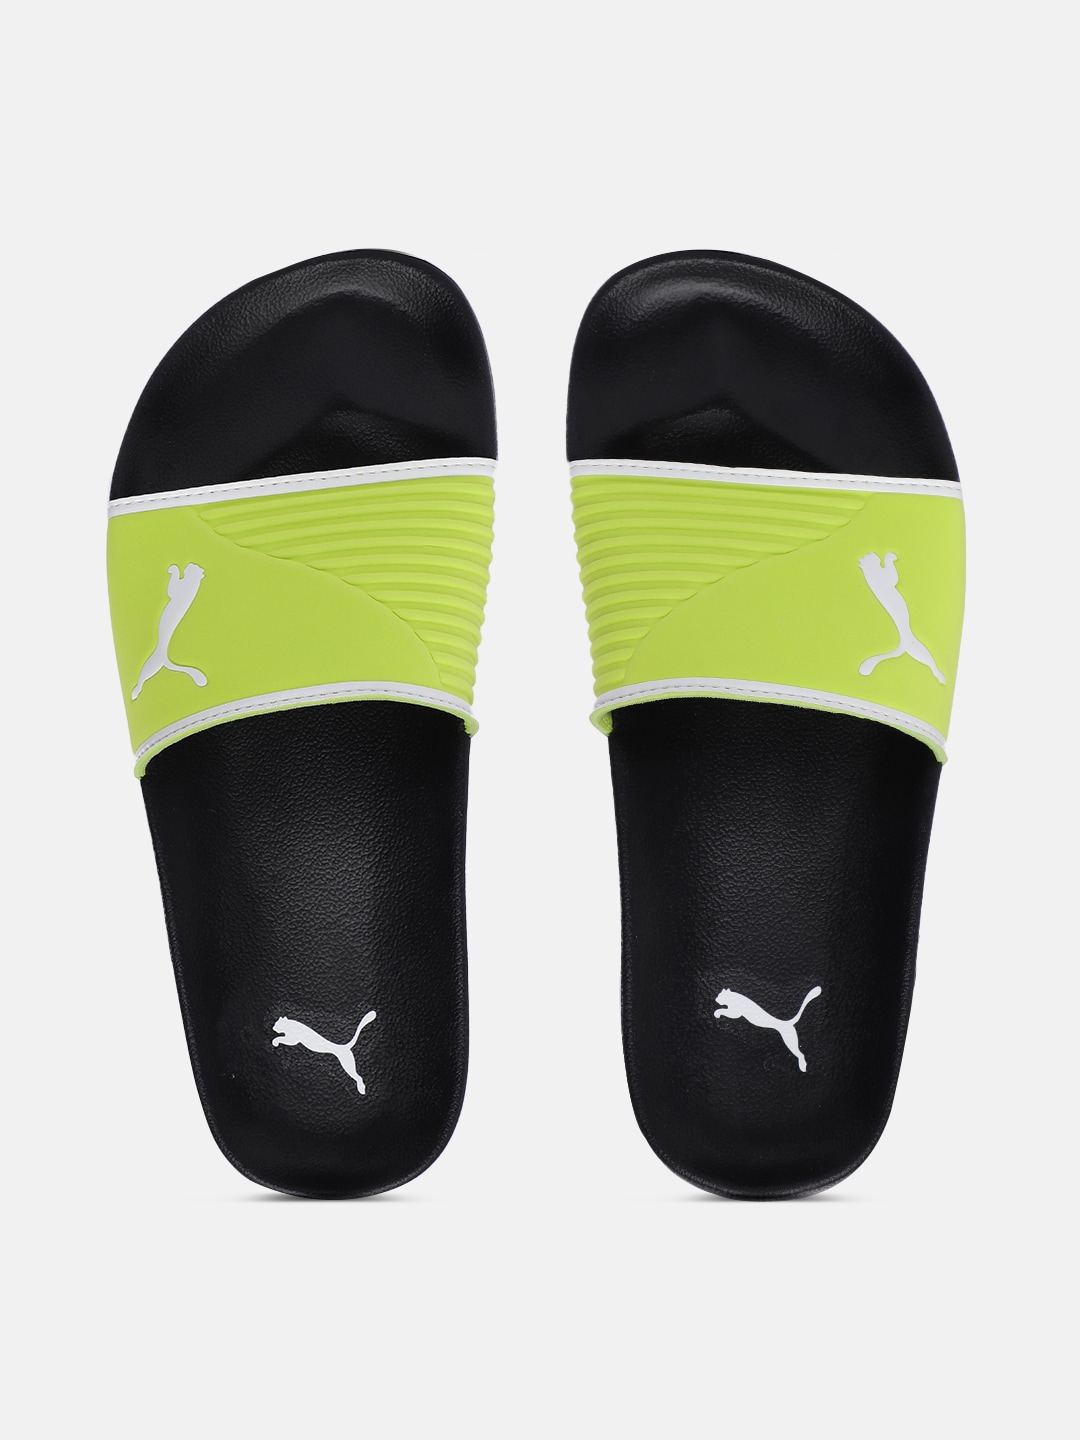 Puma Unisex Lime Green Leadcat 2.0 Shower Sliders Price in India